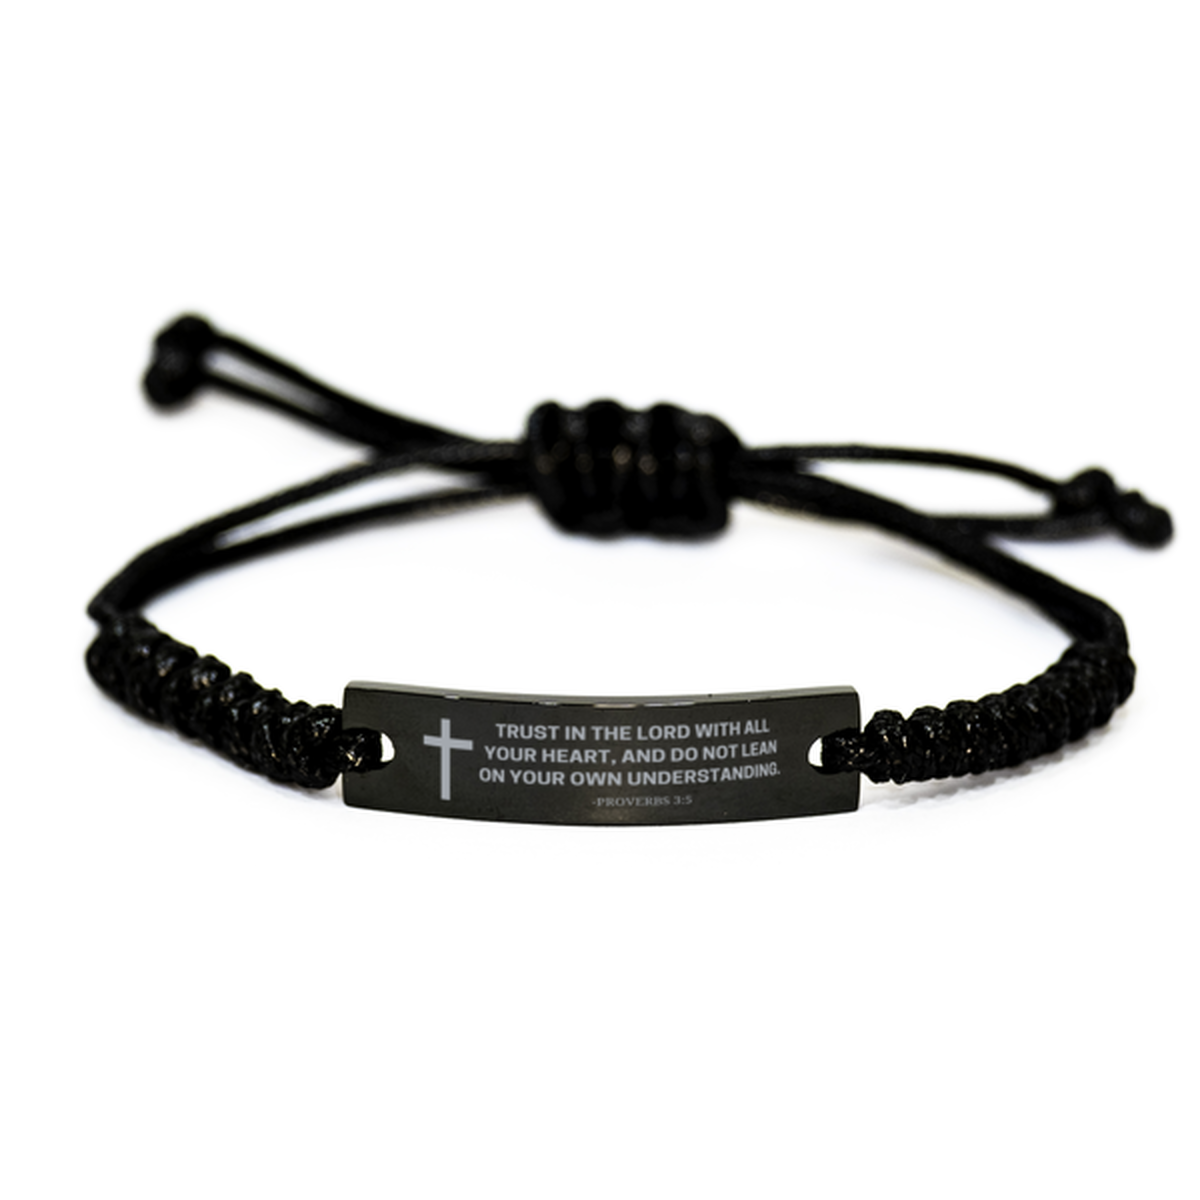 Baptism Gifts For Teenage Boys Girls, Christian Bible Verse Black Rope Bracelet, Trust in the Lord with all your heart, Catholic Confirmation Gifts for Son, Godson, Grandson, Nephew